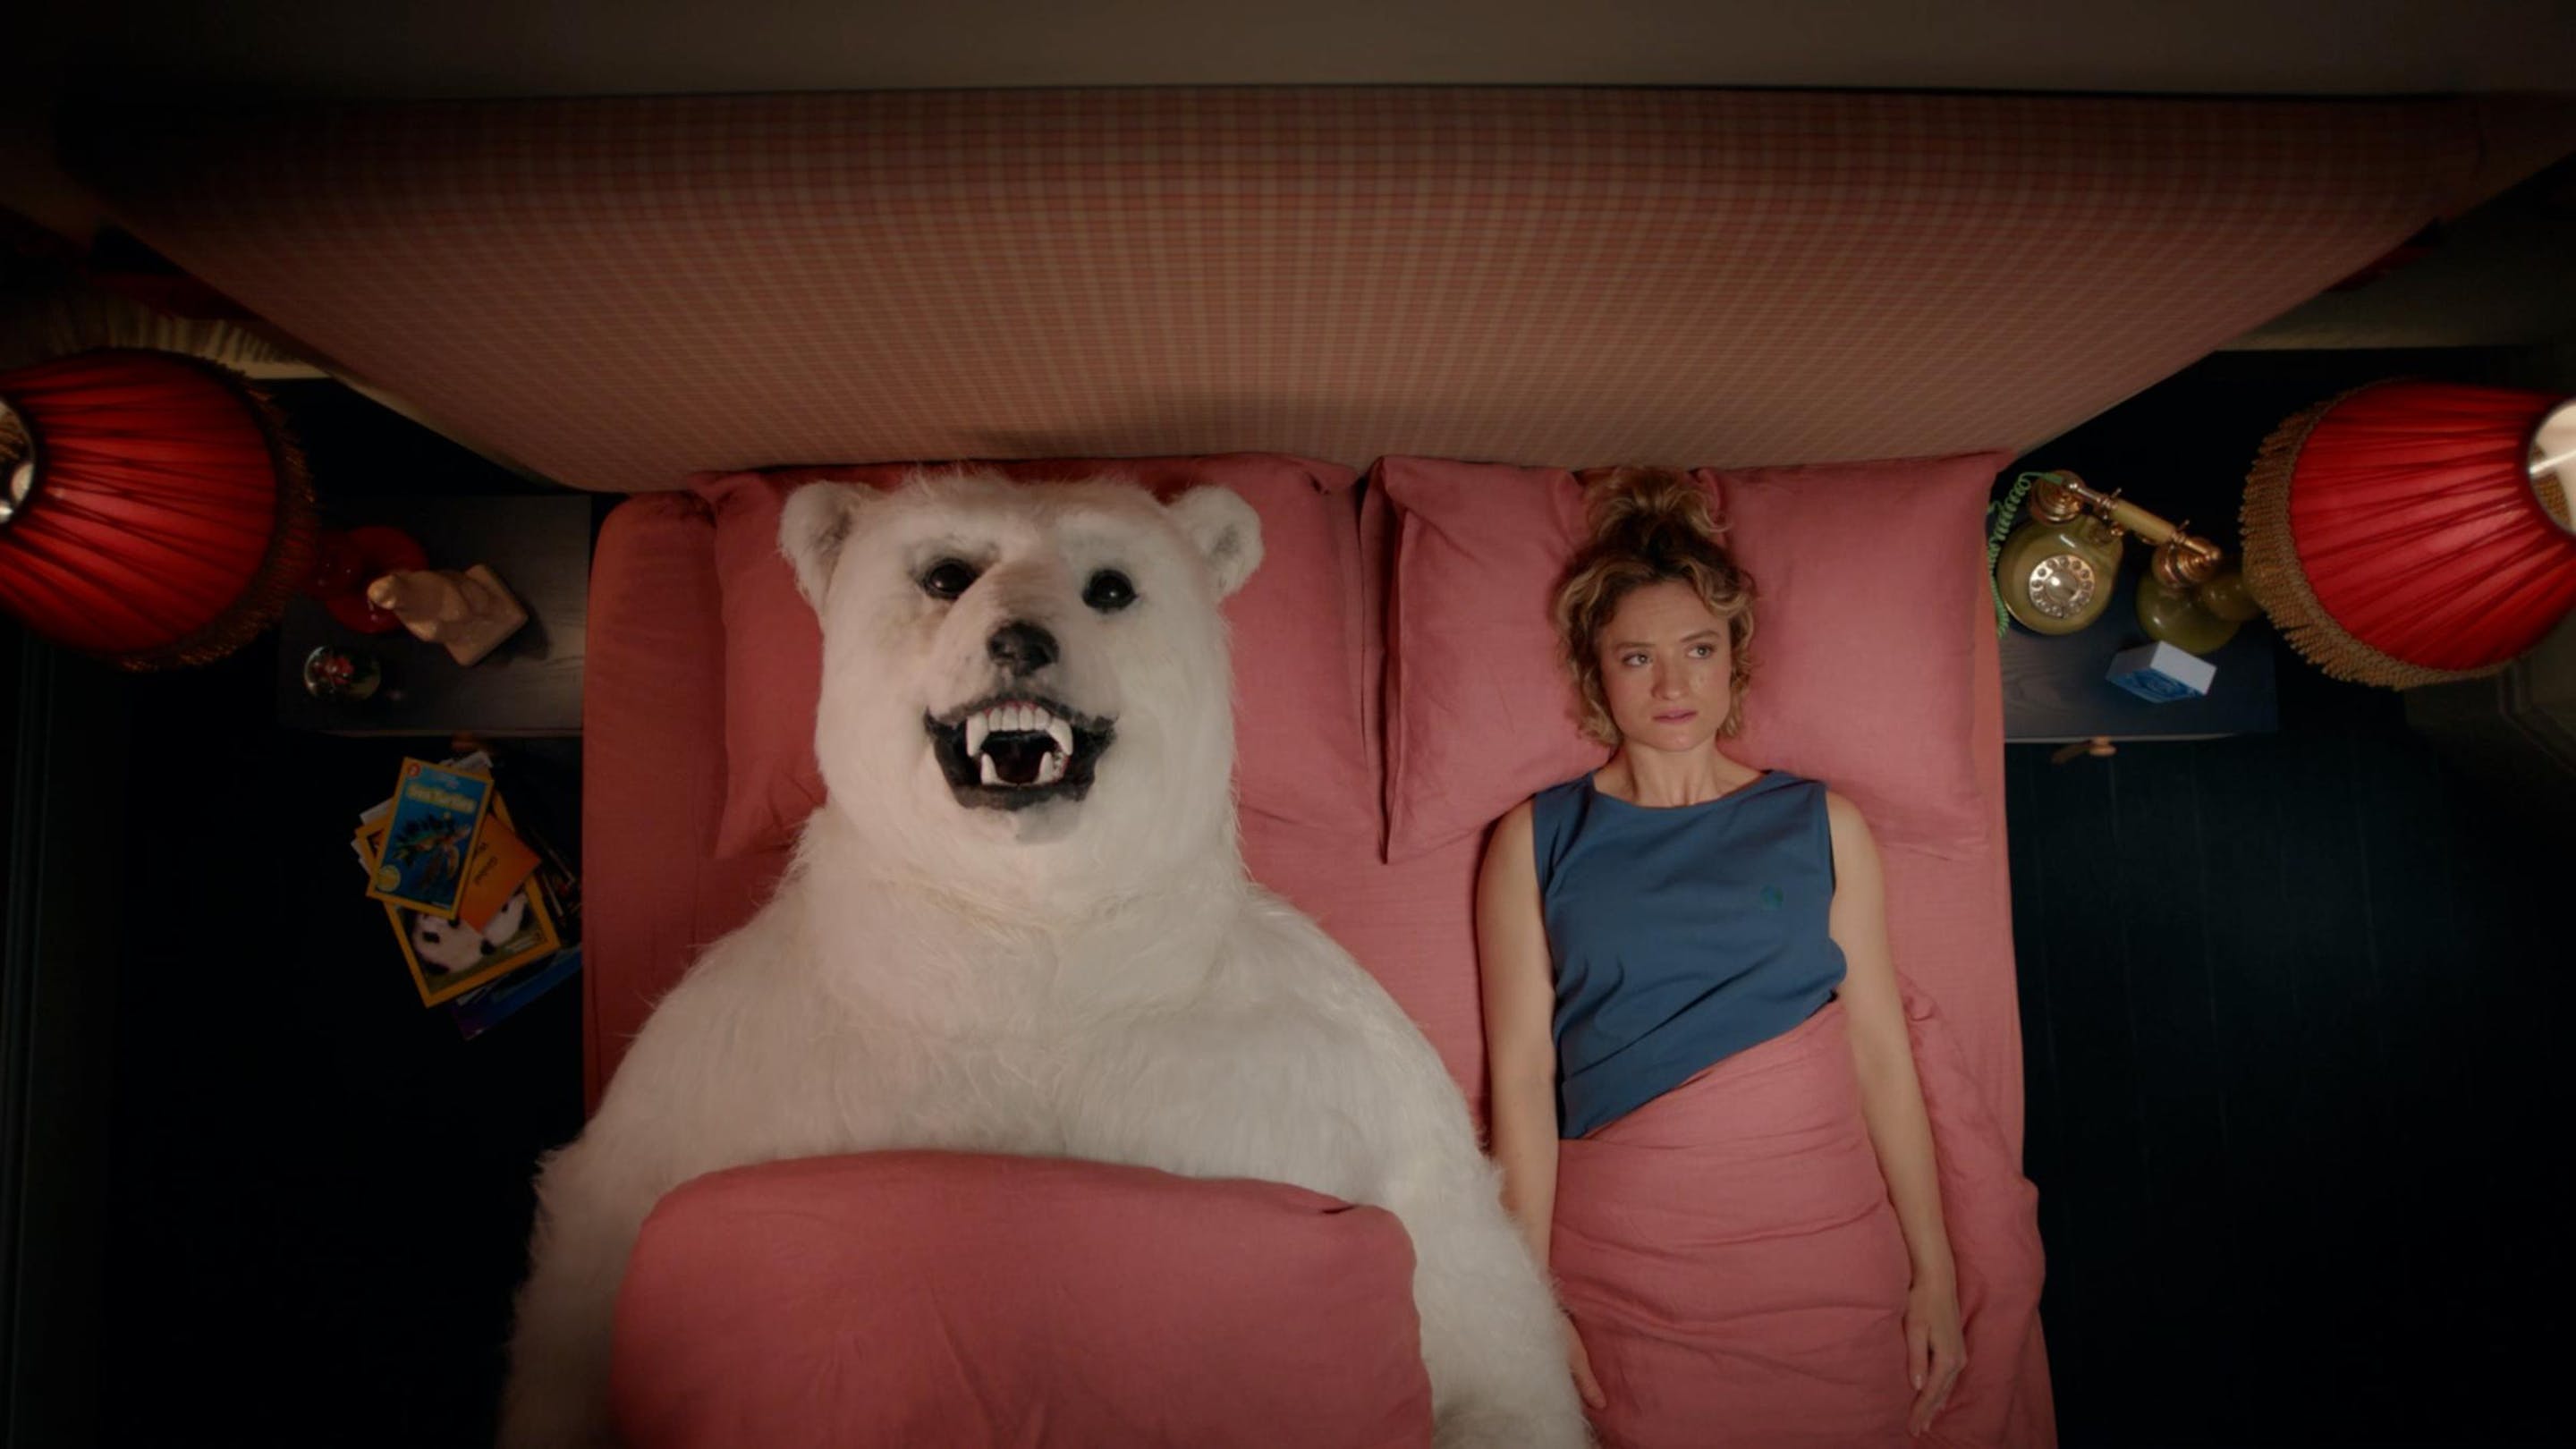 An overhead view of a woman in a blue top laying in a pink bed with a polar bear. They lay side by side on their backs.